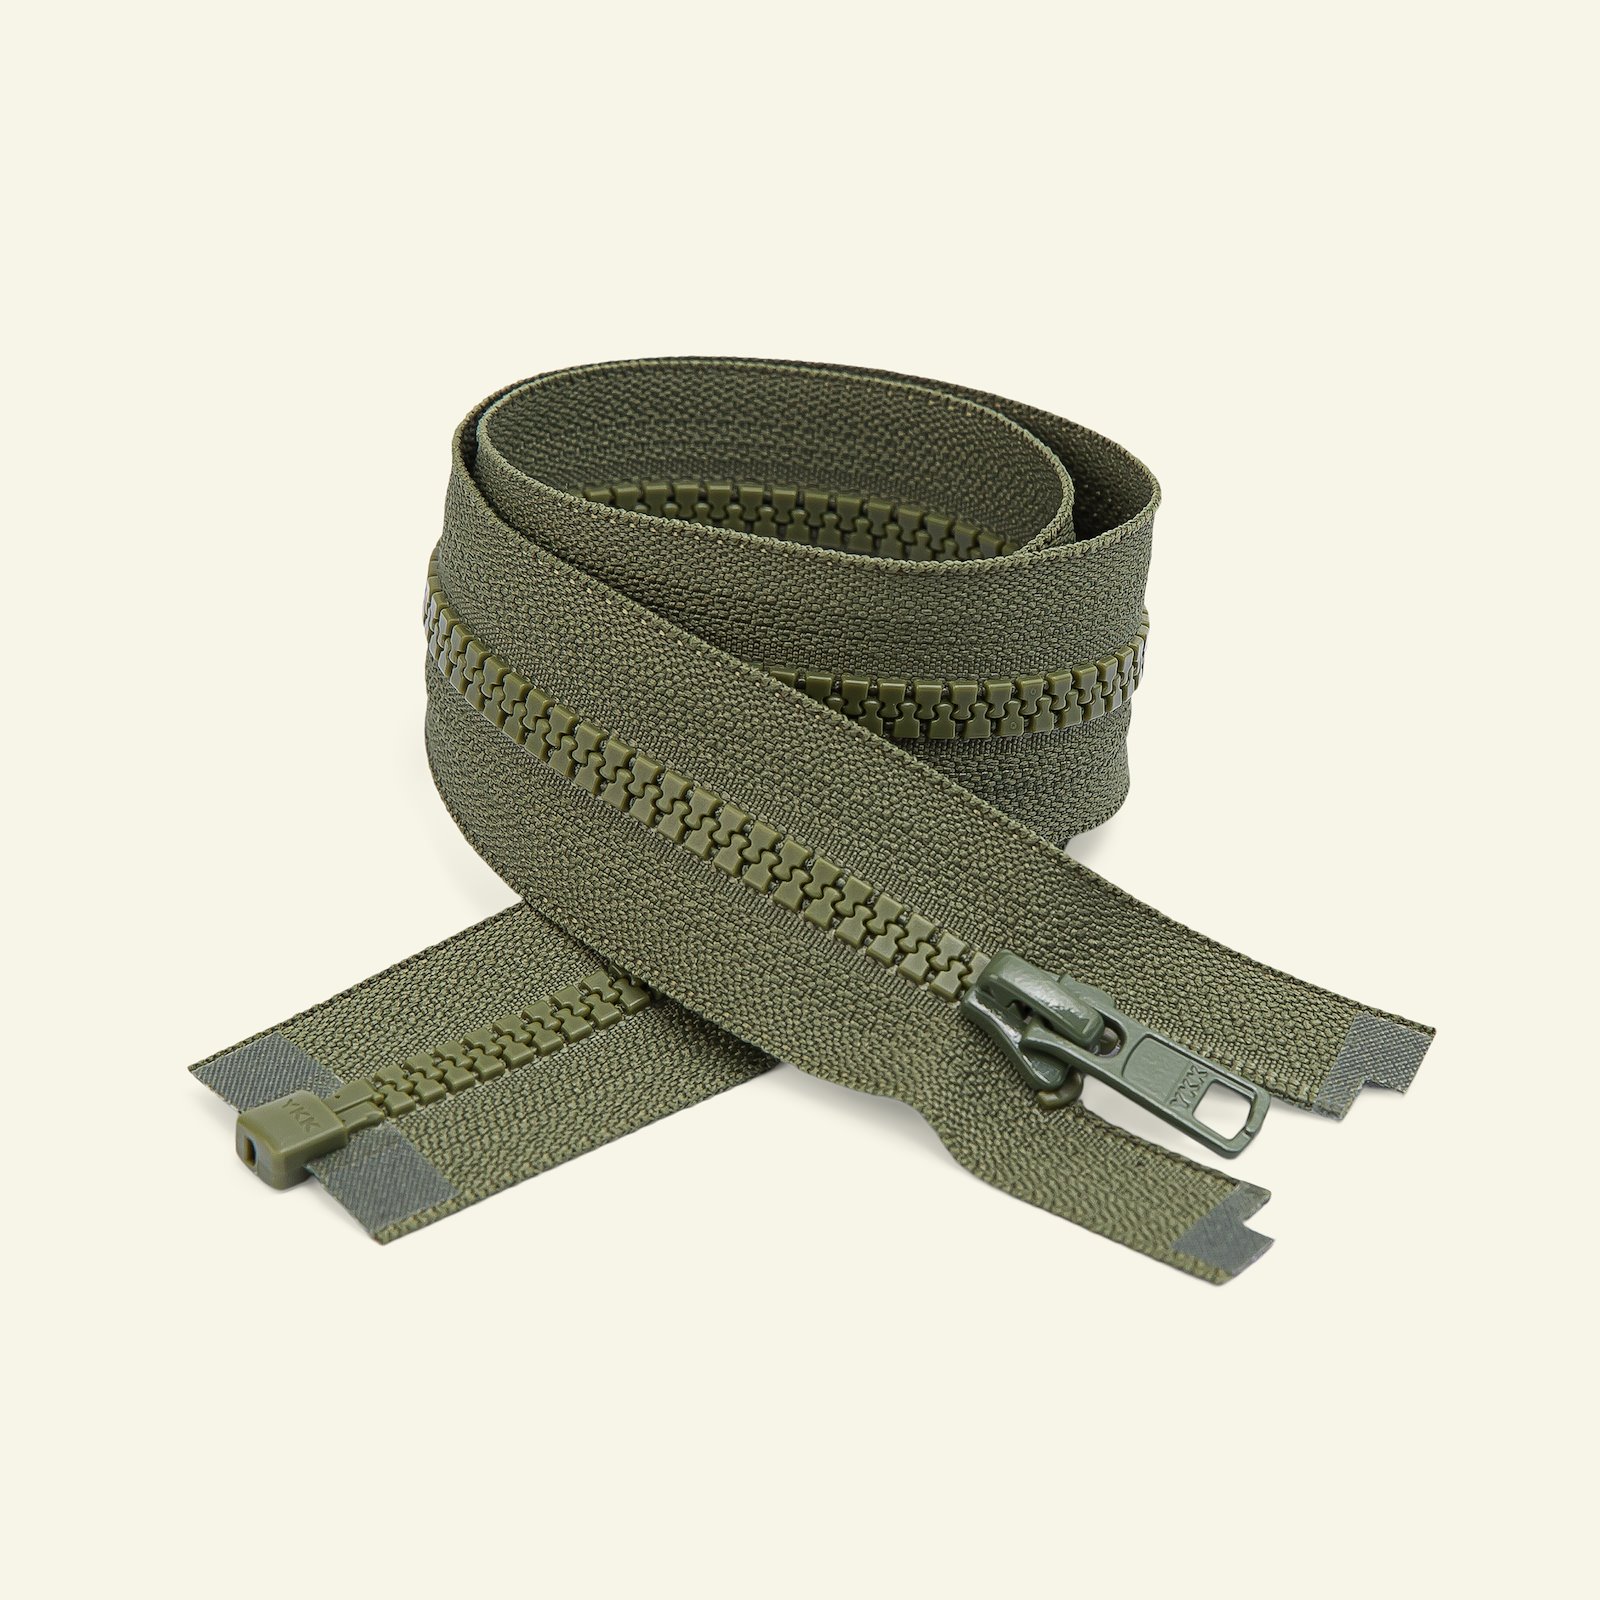 YKK zip 6mm open end 45cm army x50033_pack